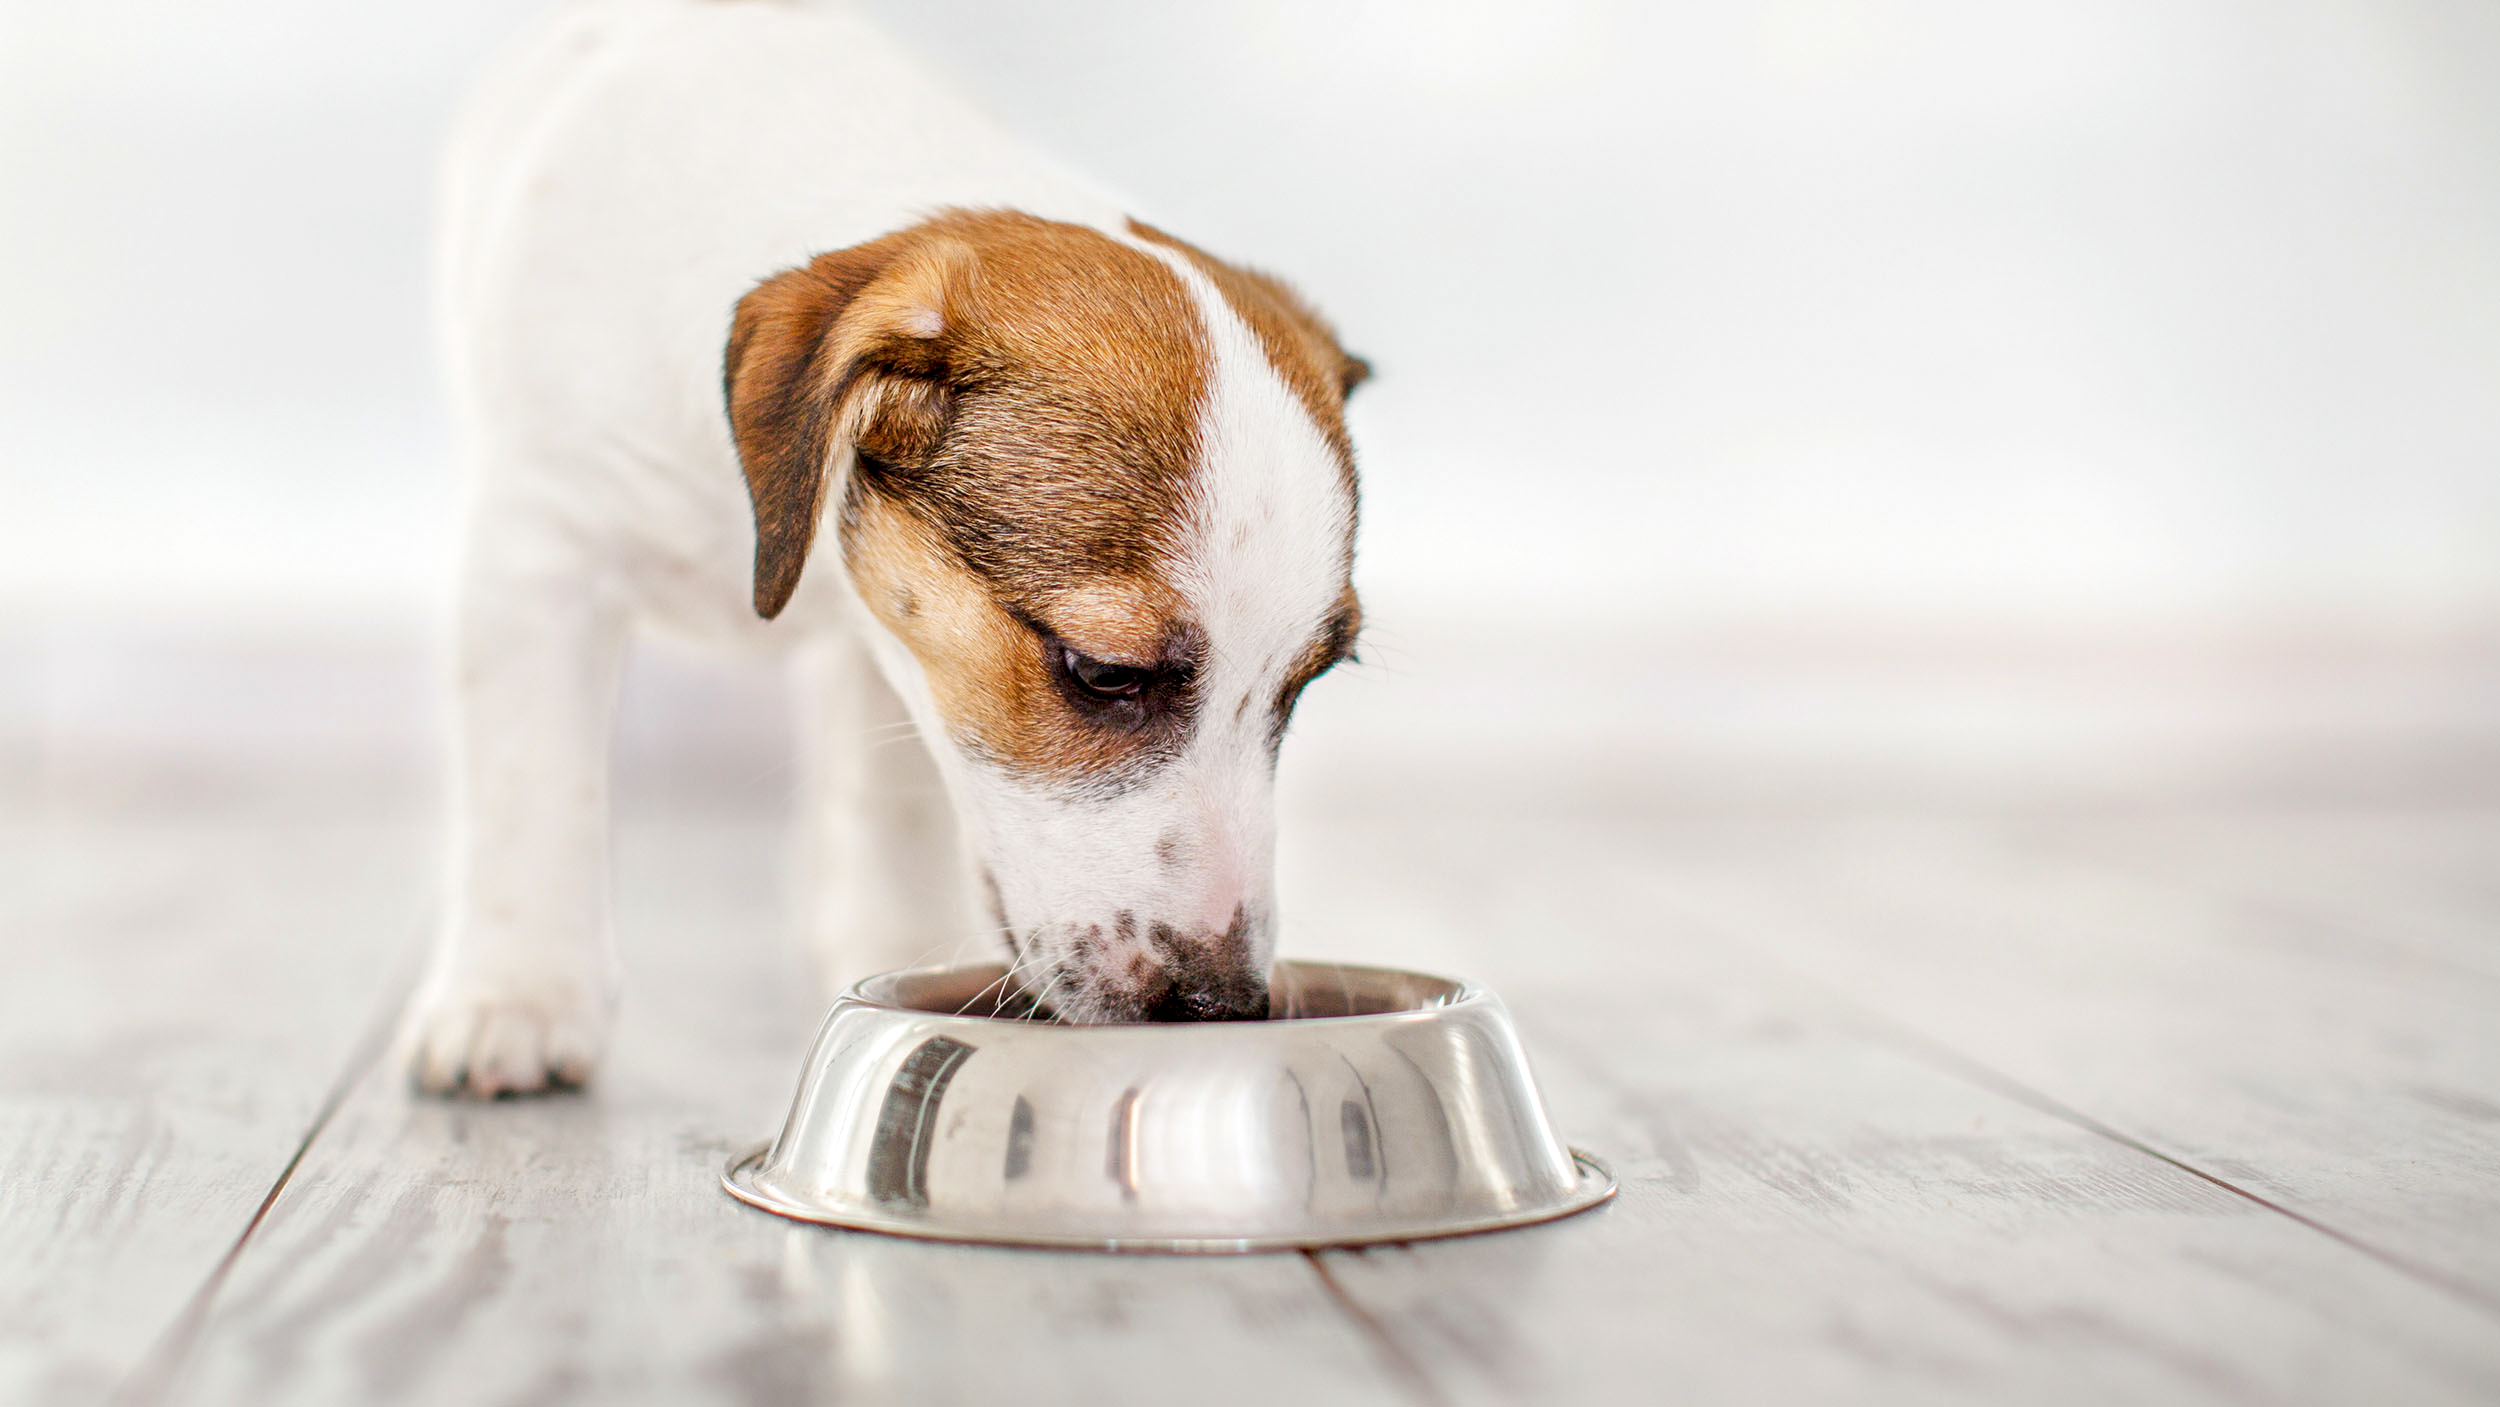 Puppy Jack Russell standing indoors on a wooden floor eating from a silver bowl.